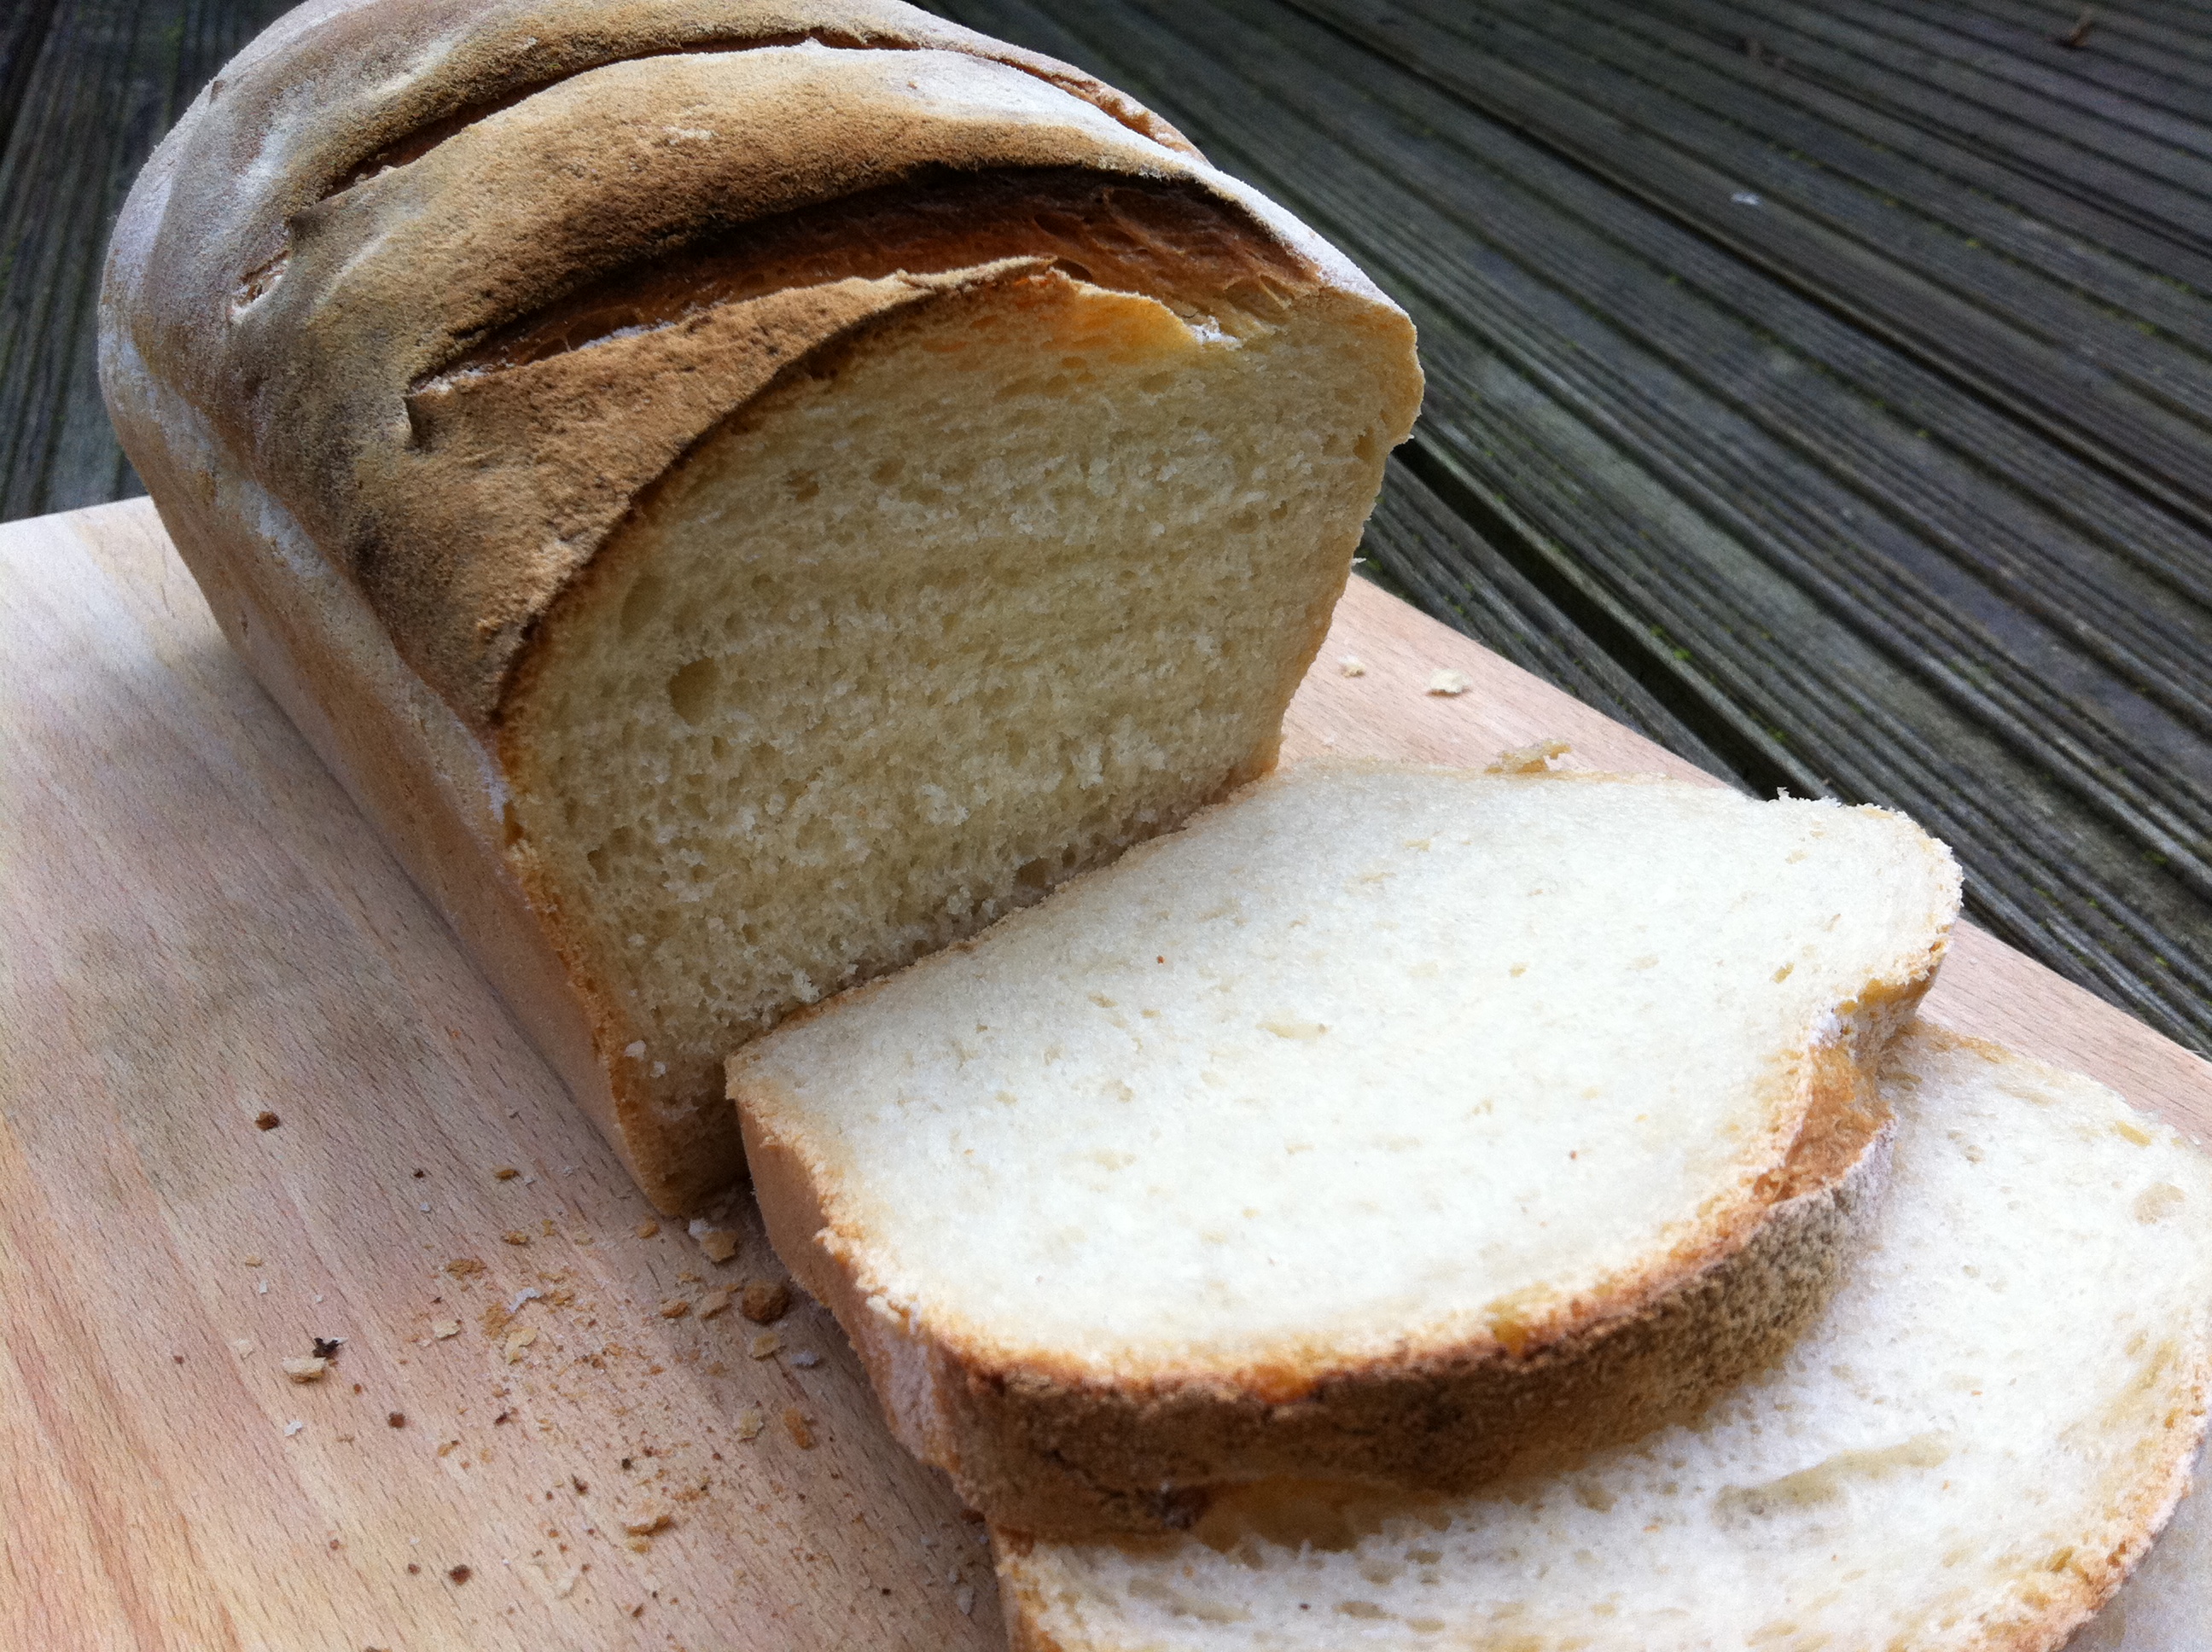 Deep South Dish: Extra Large White Loaf Bread